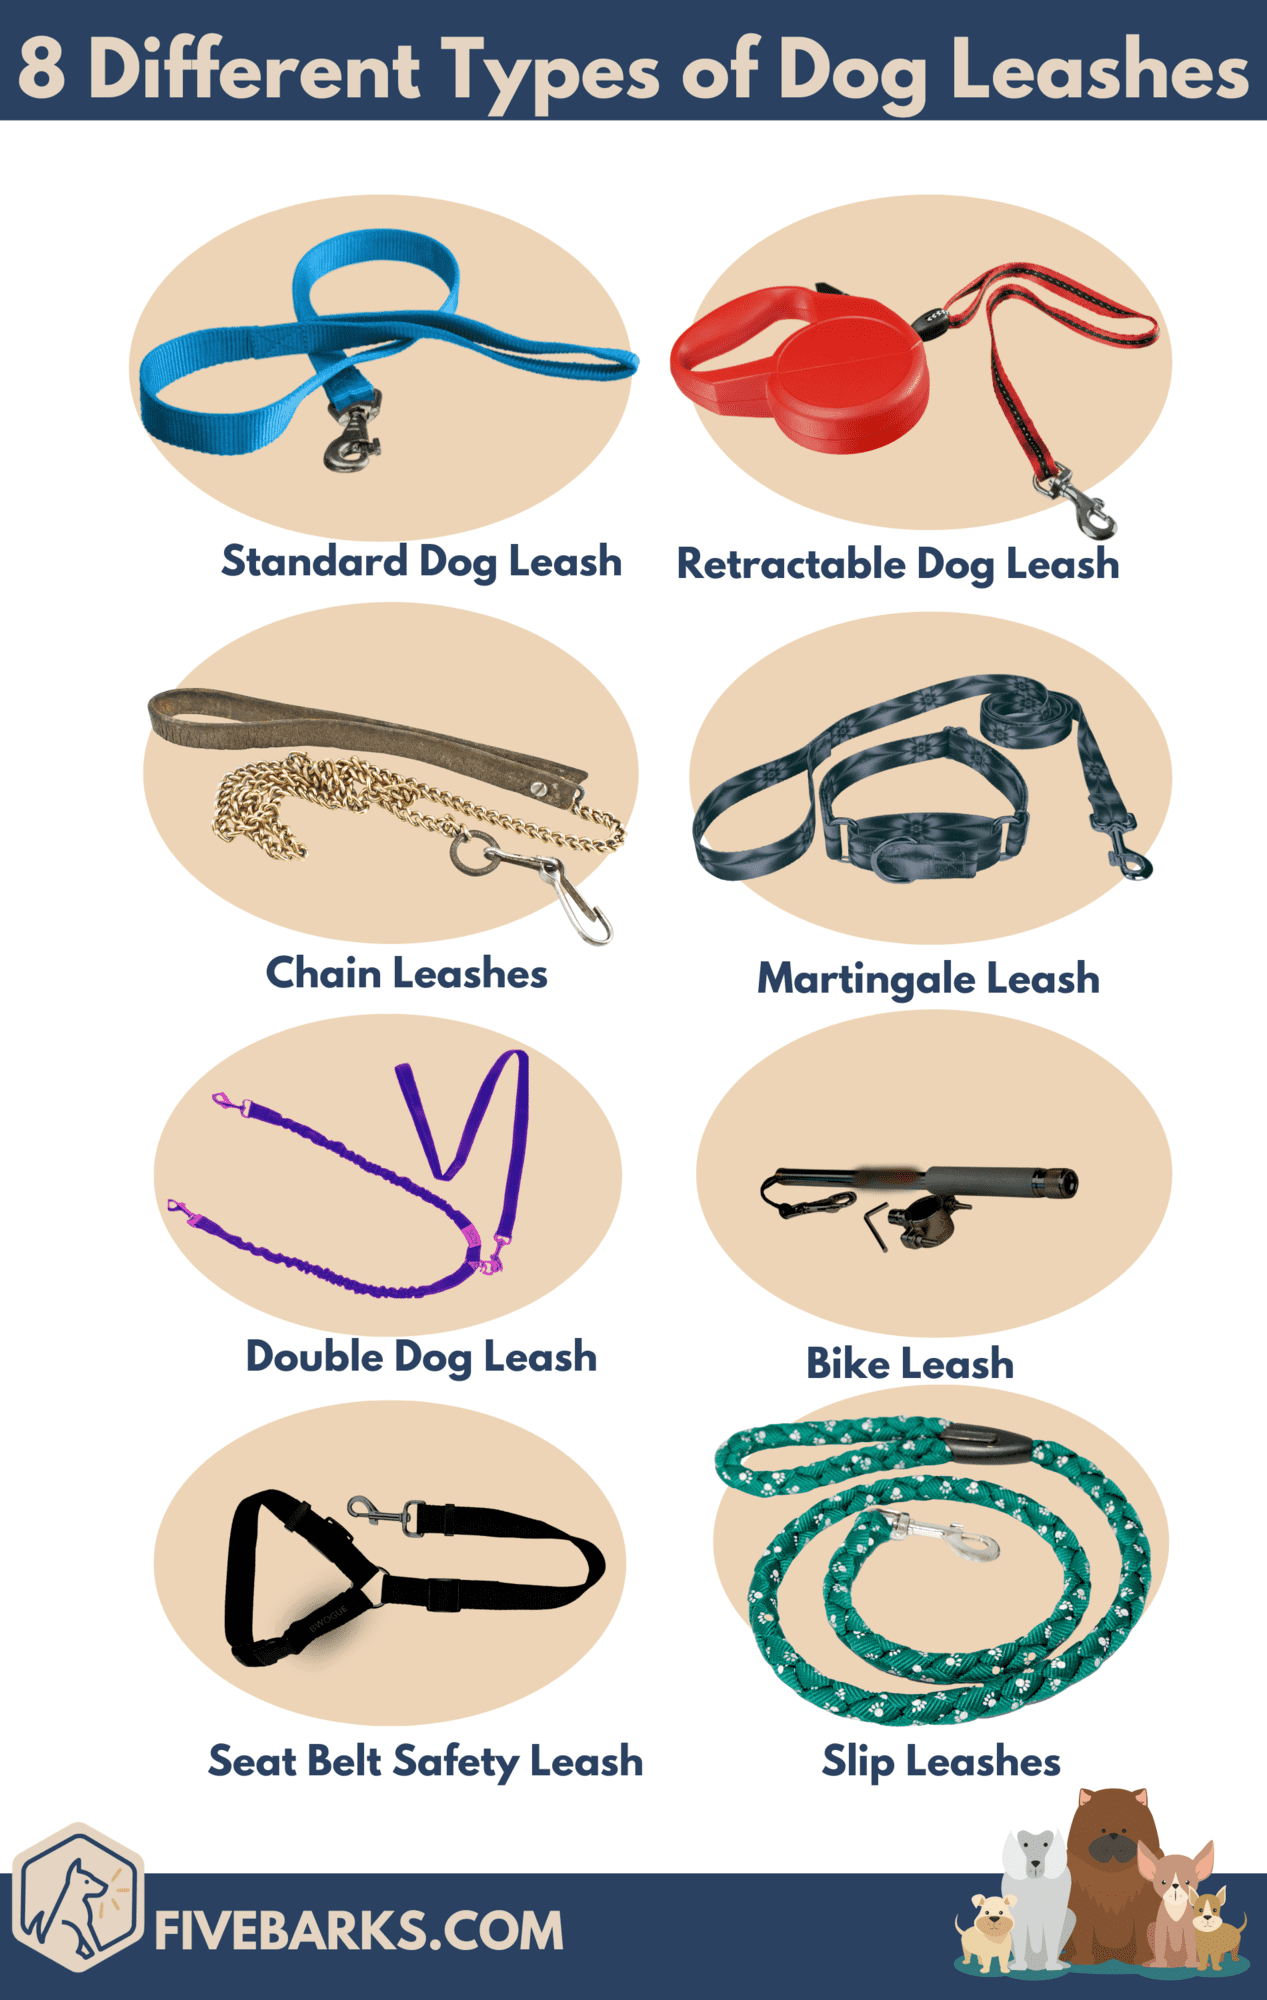 8 Different Types of Dog Leashes